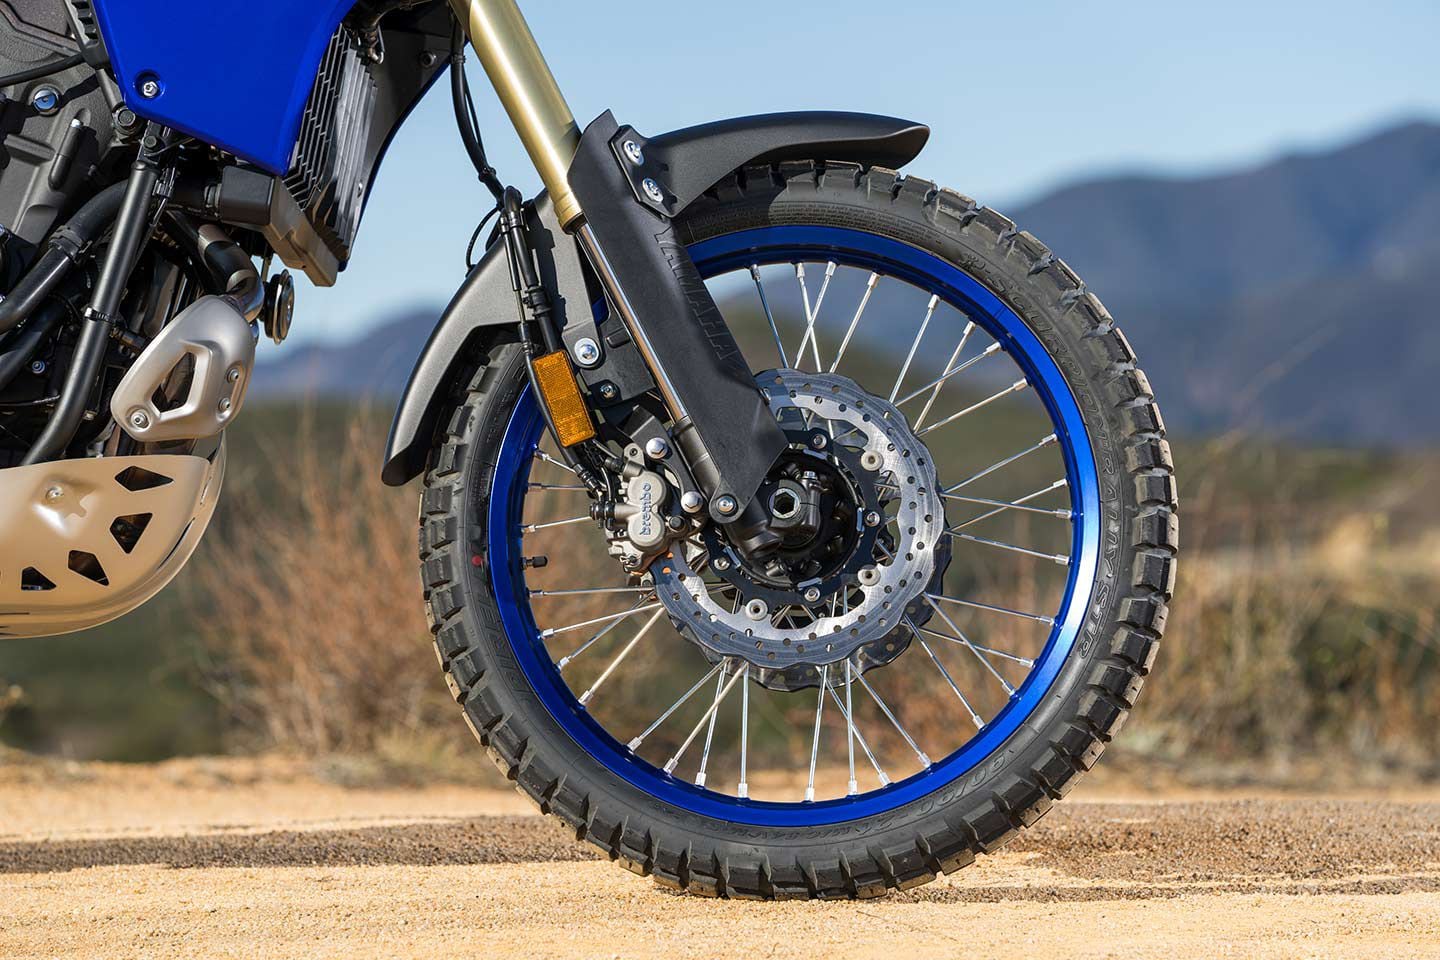 Tenere 700 Long-Term Review  With Limited Off-Road Skills 